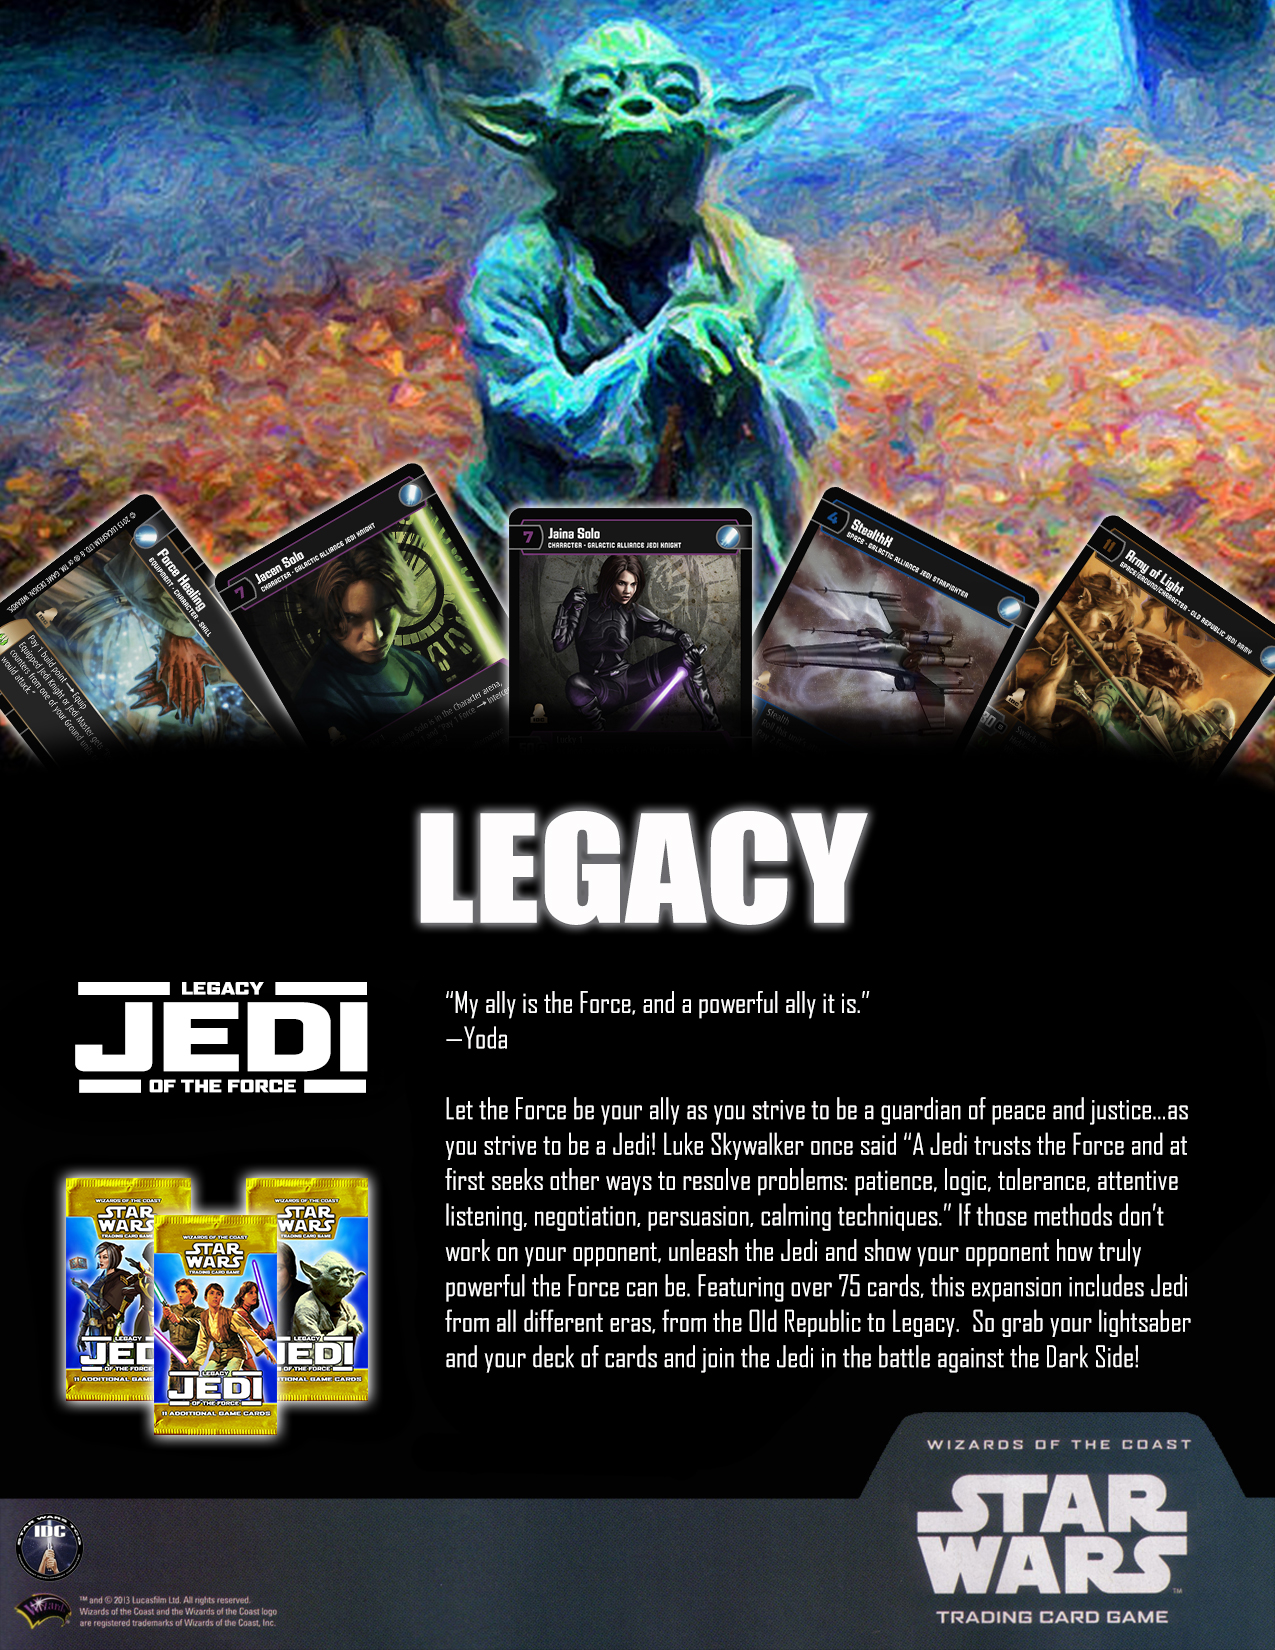 Jedi | Star Wars Trading Card Game: Independent Development Committee